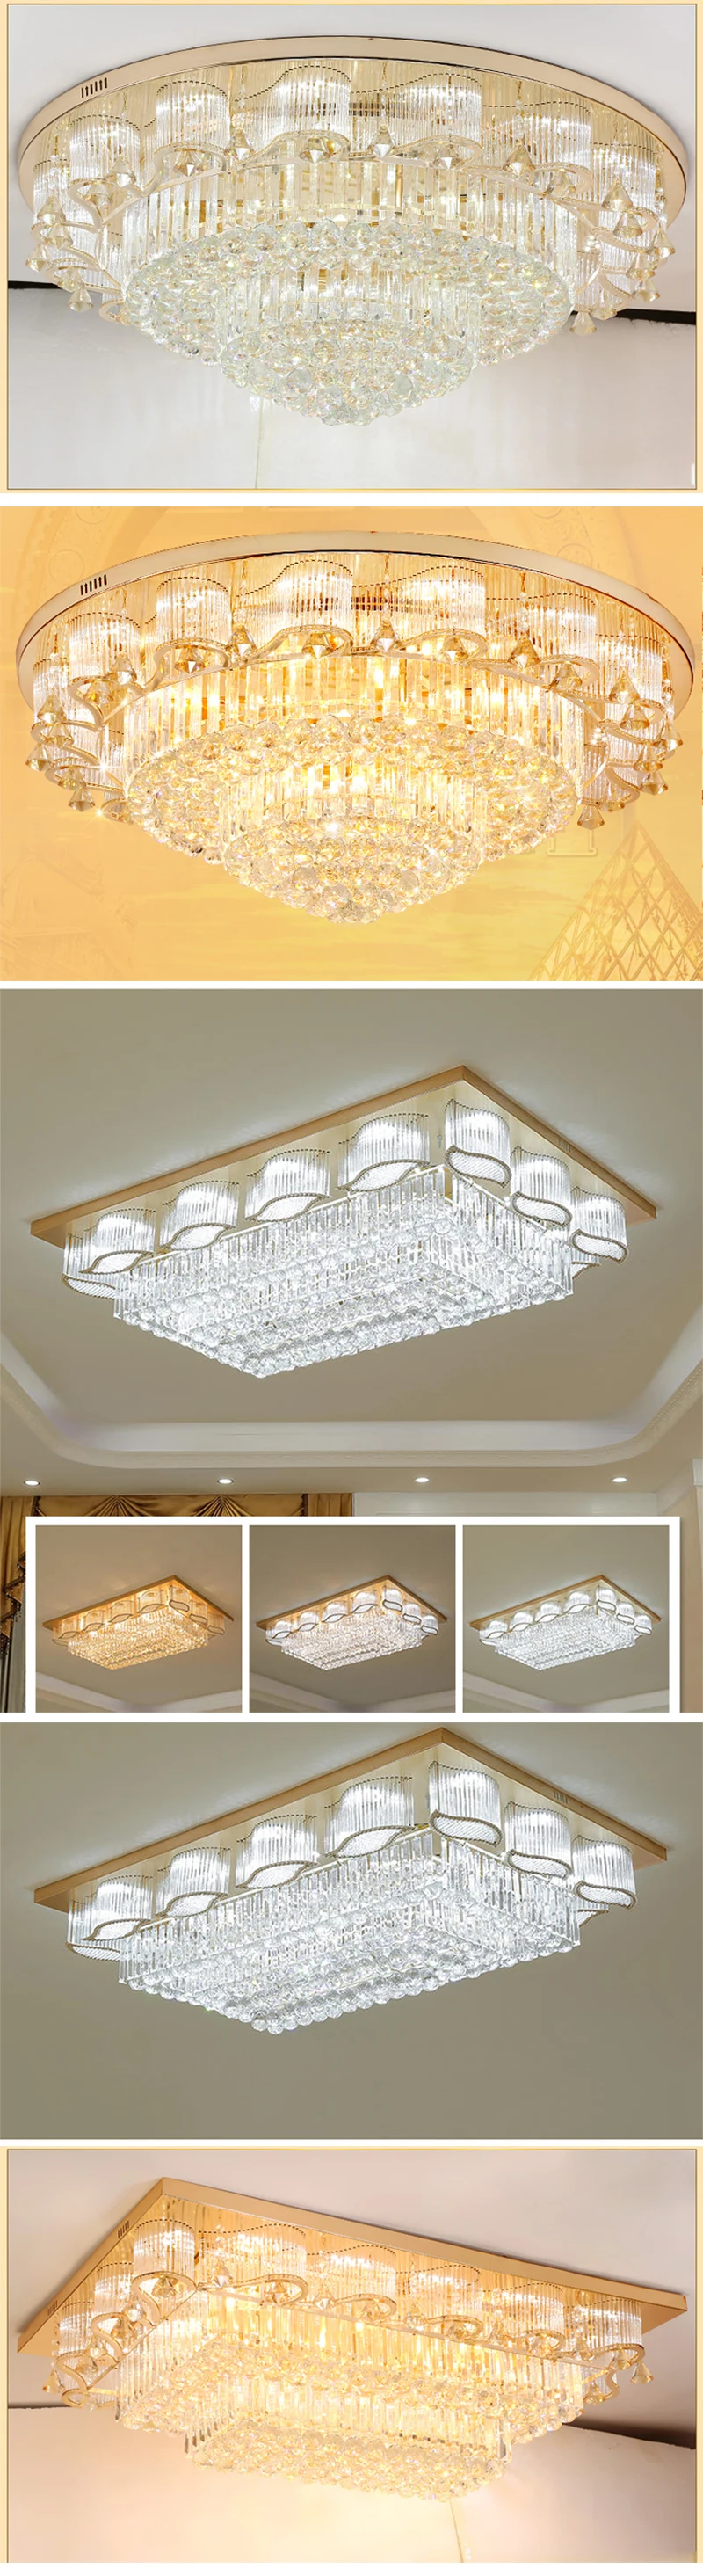 Exquisite design moroccan style handmade e27 vintagearabic style brass ceiling light crystal ceiling lamp